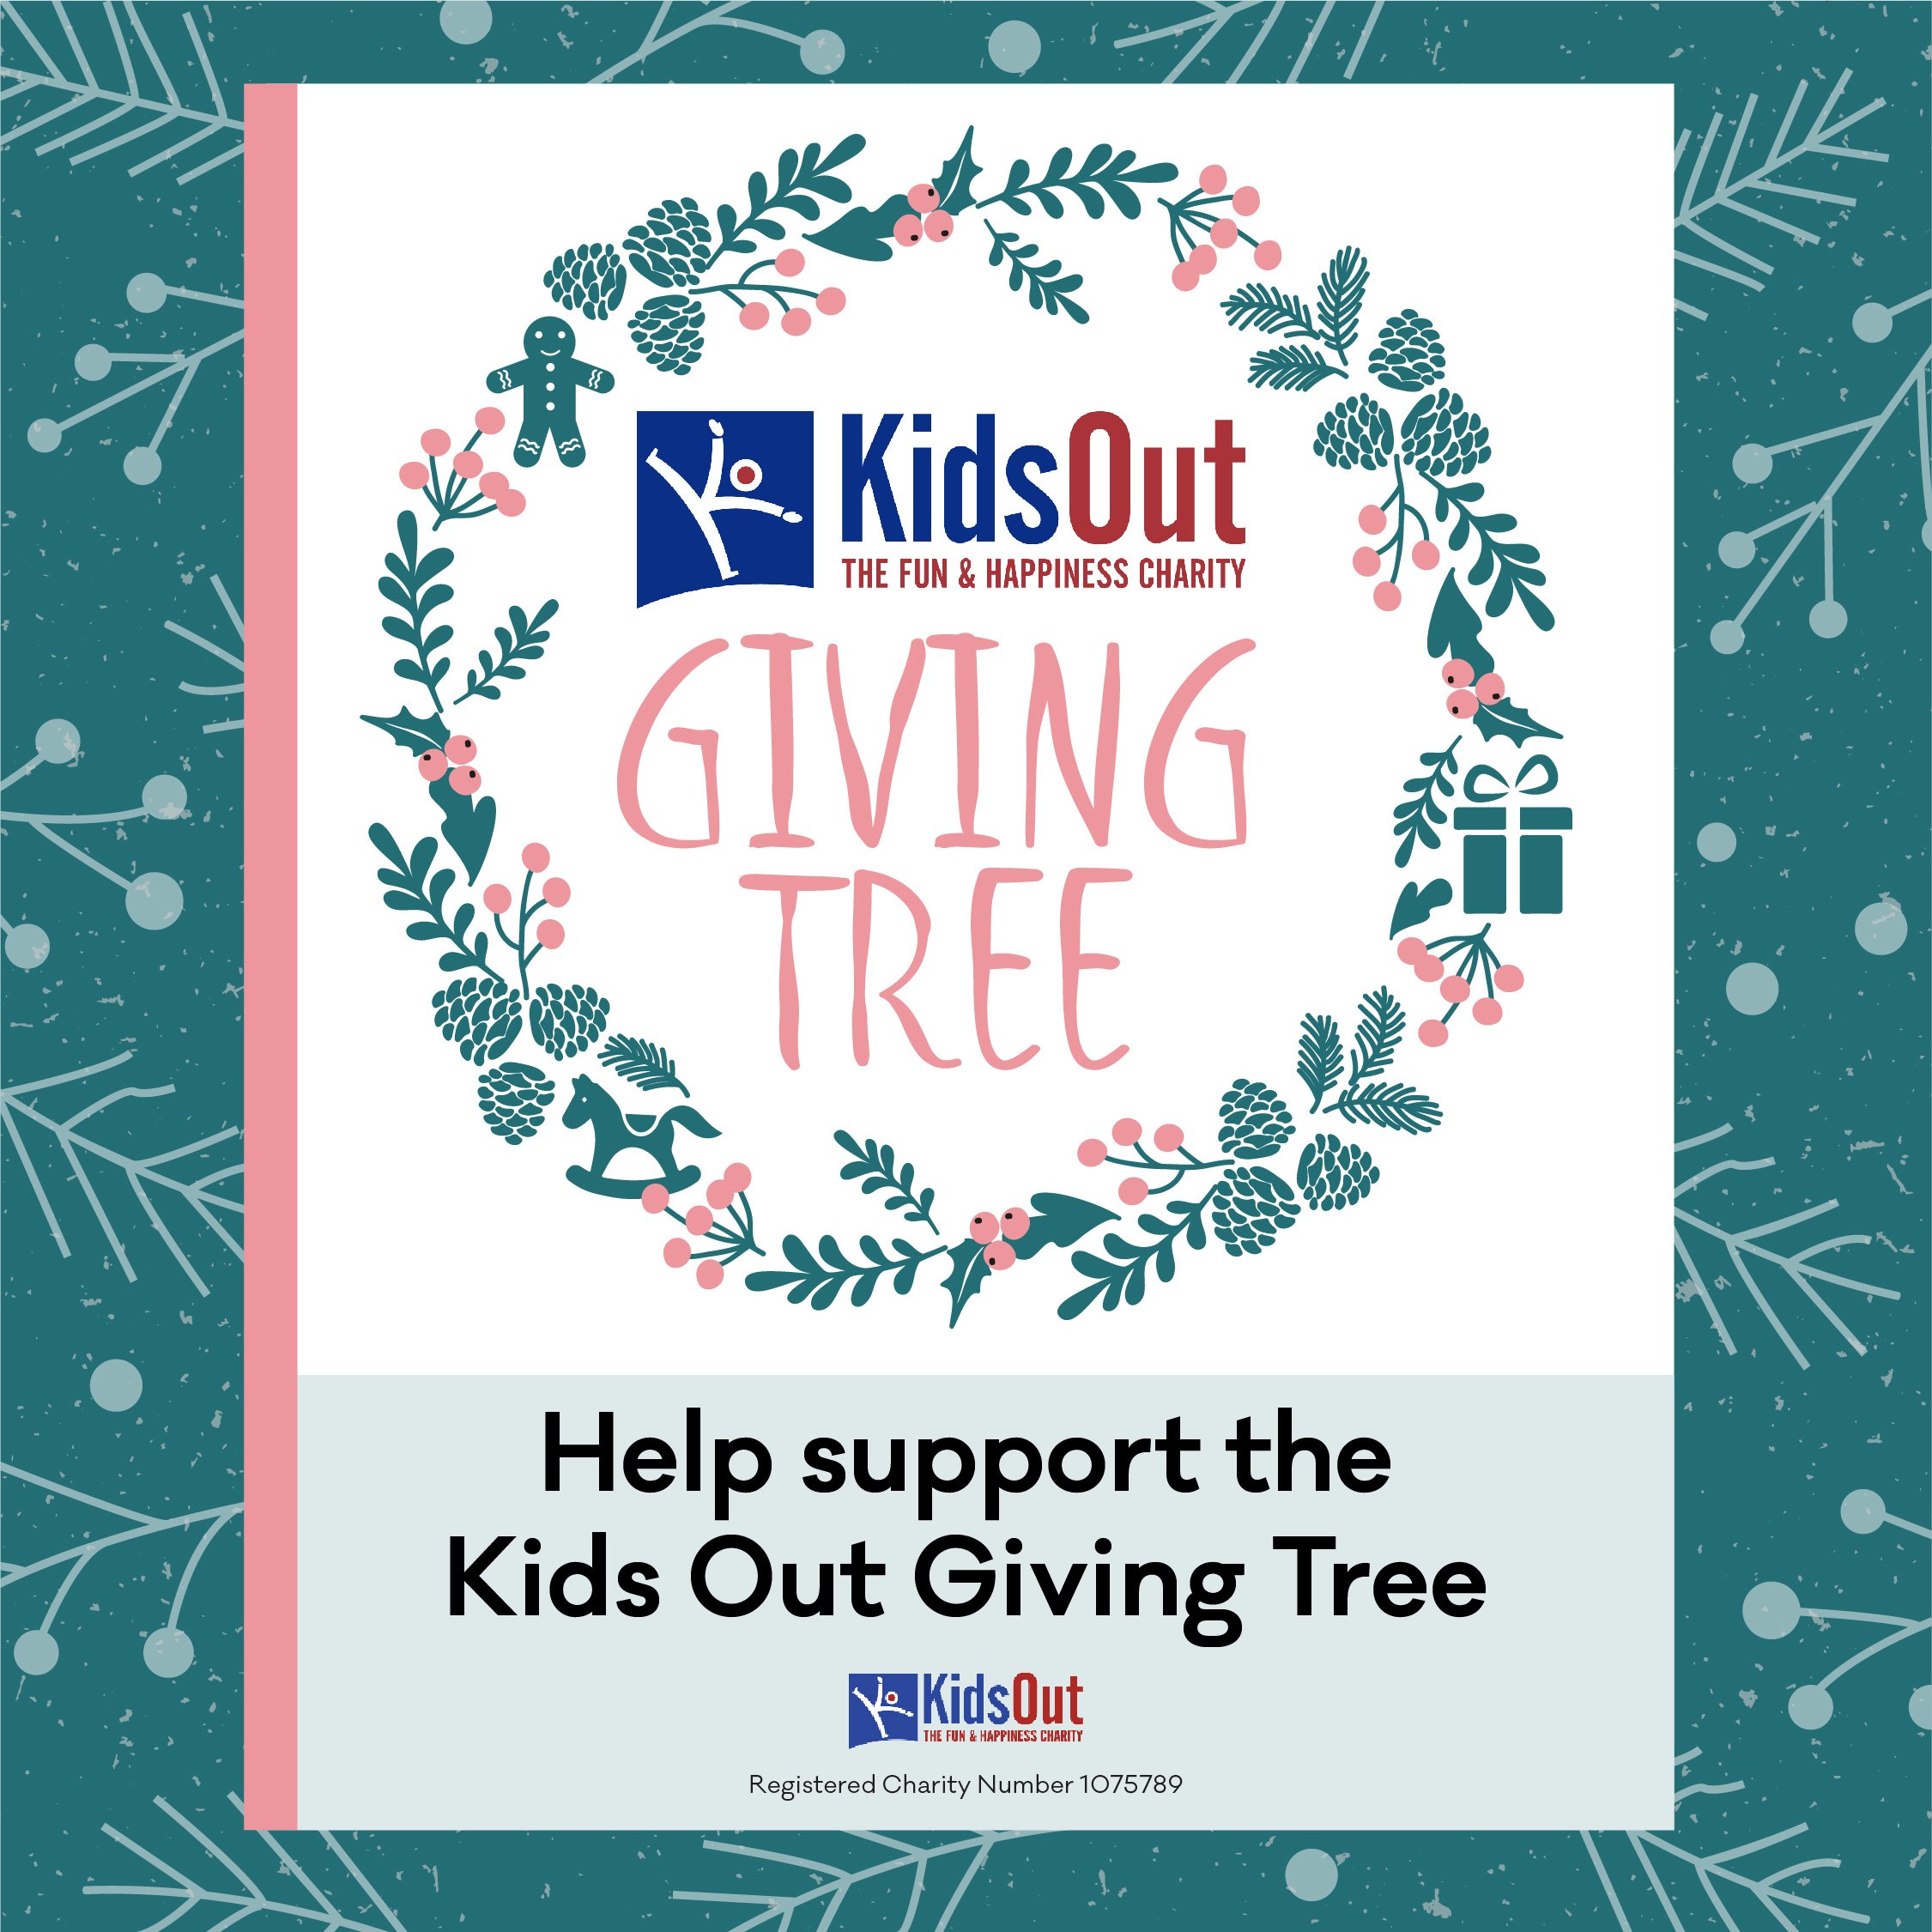 ‘Kids Out’ Charity Giving Tree at centre:mk Top Image